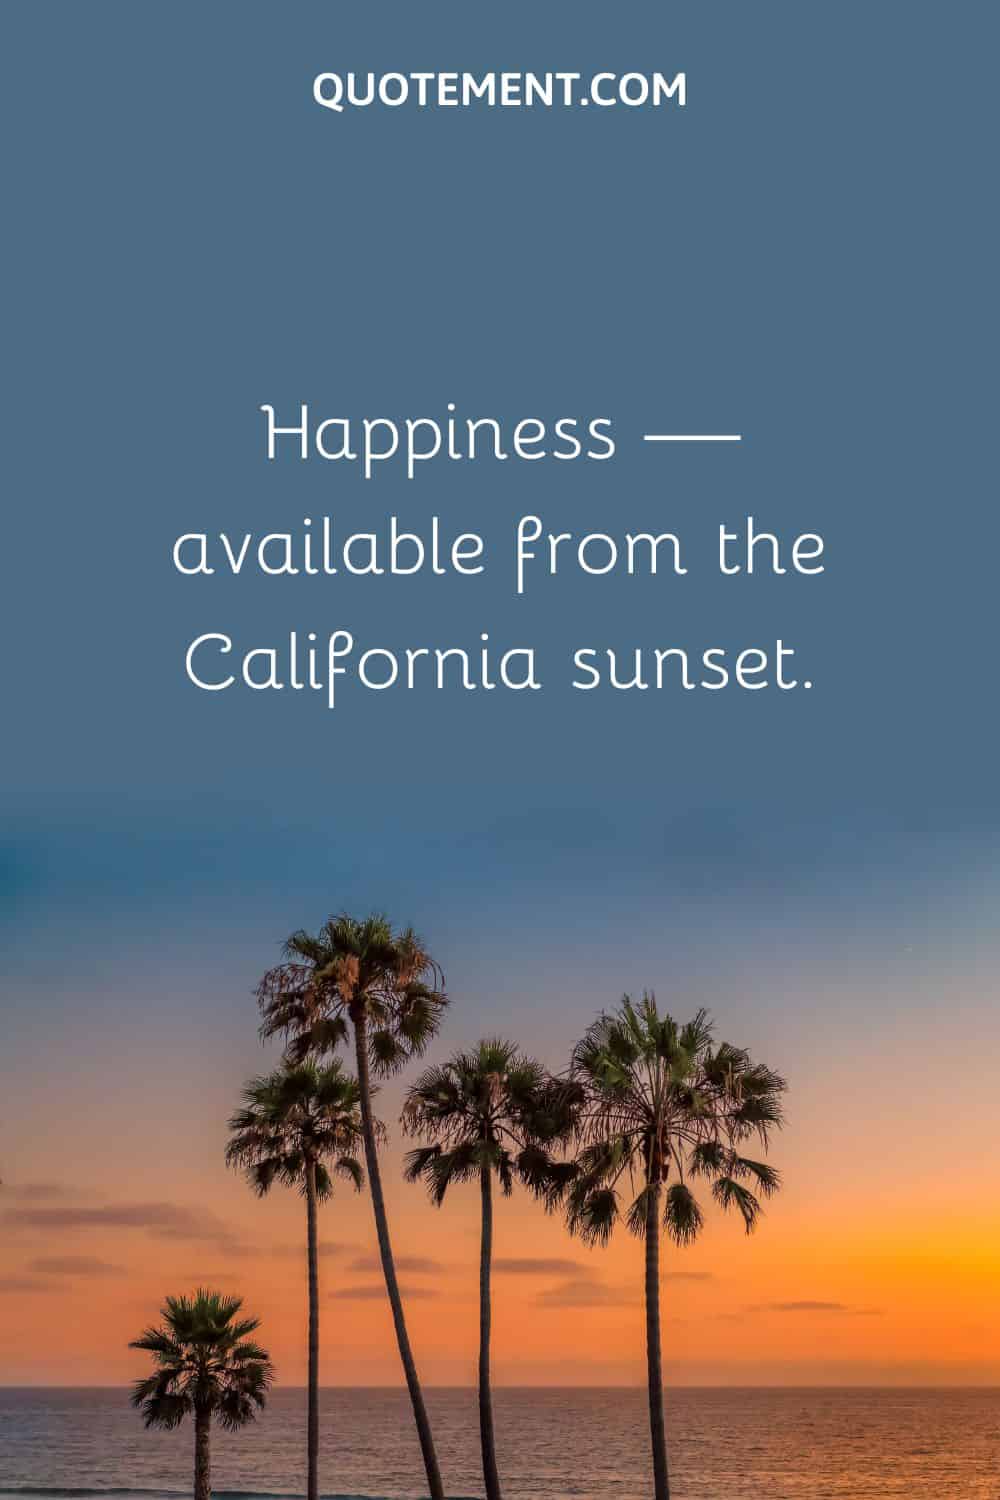 Happiness — available from the California sunset